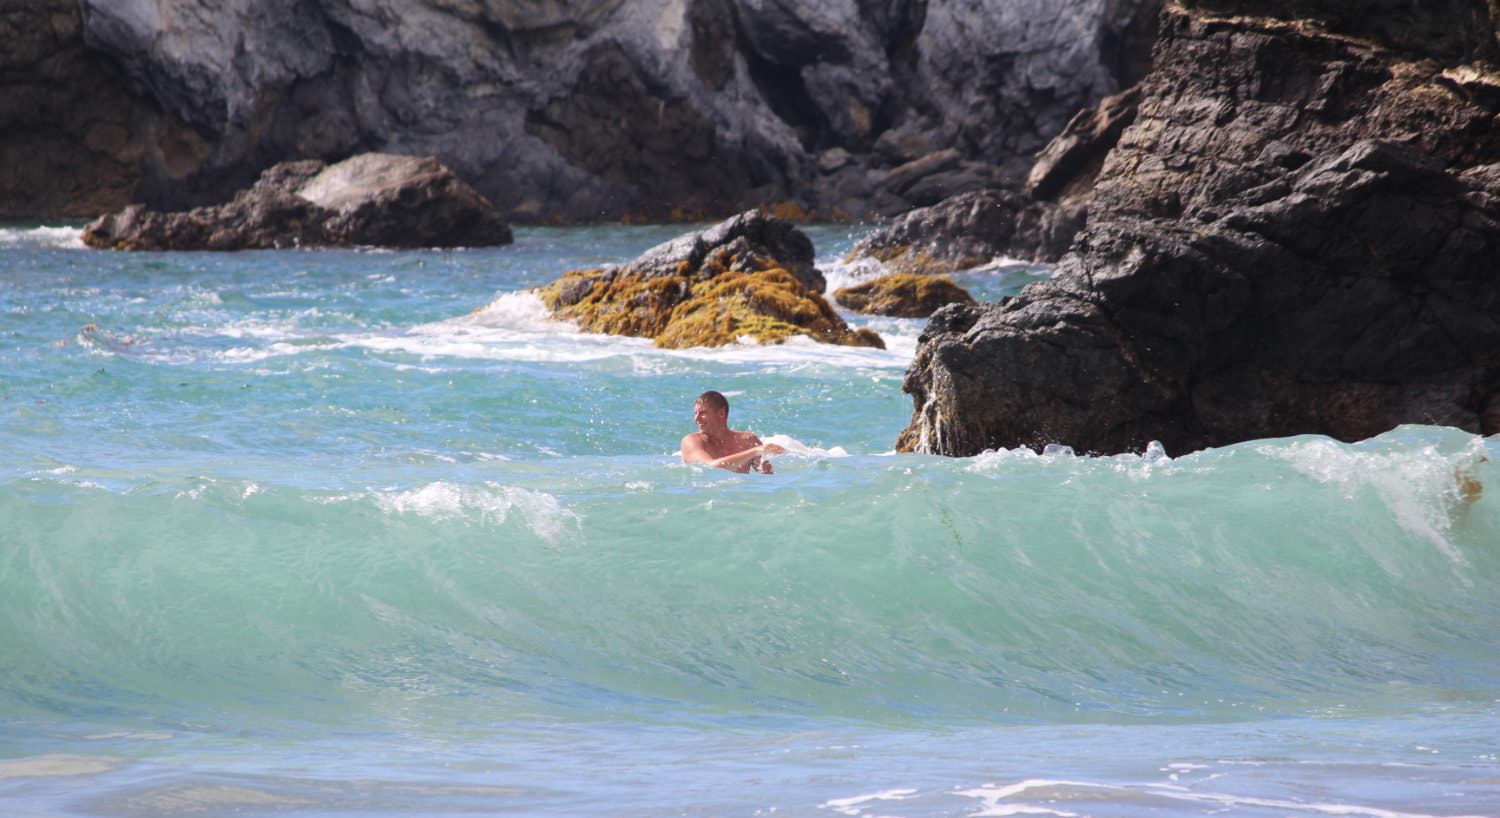 Man playing in the surf with large rocks in the background